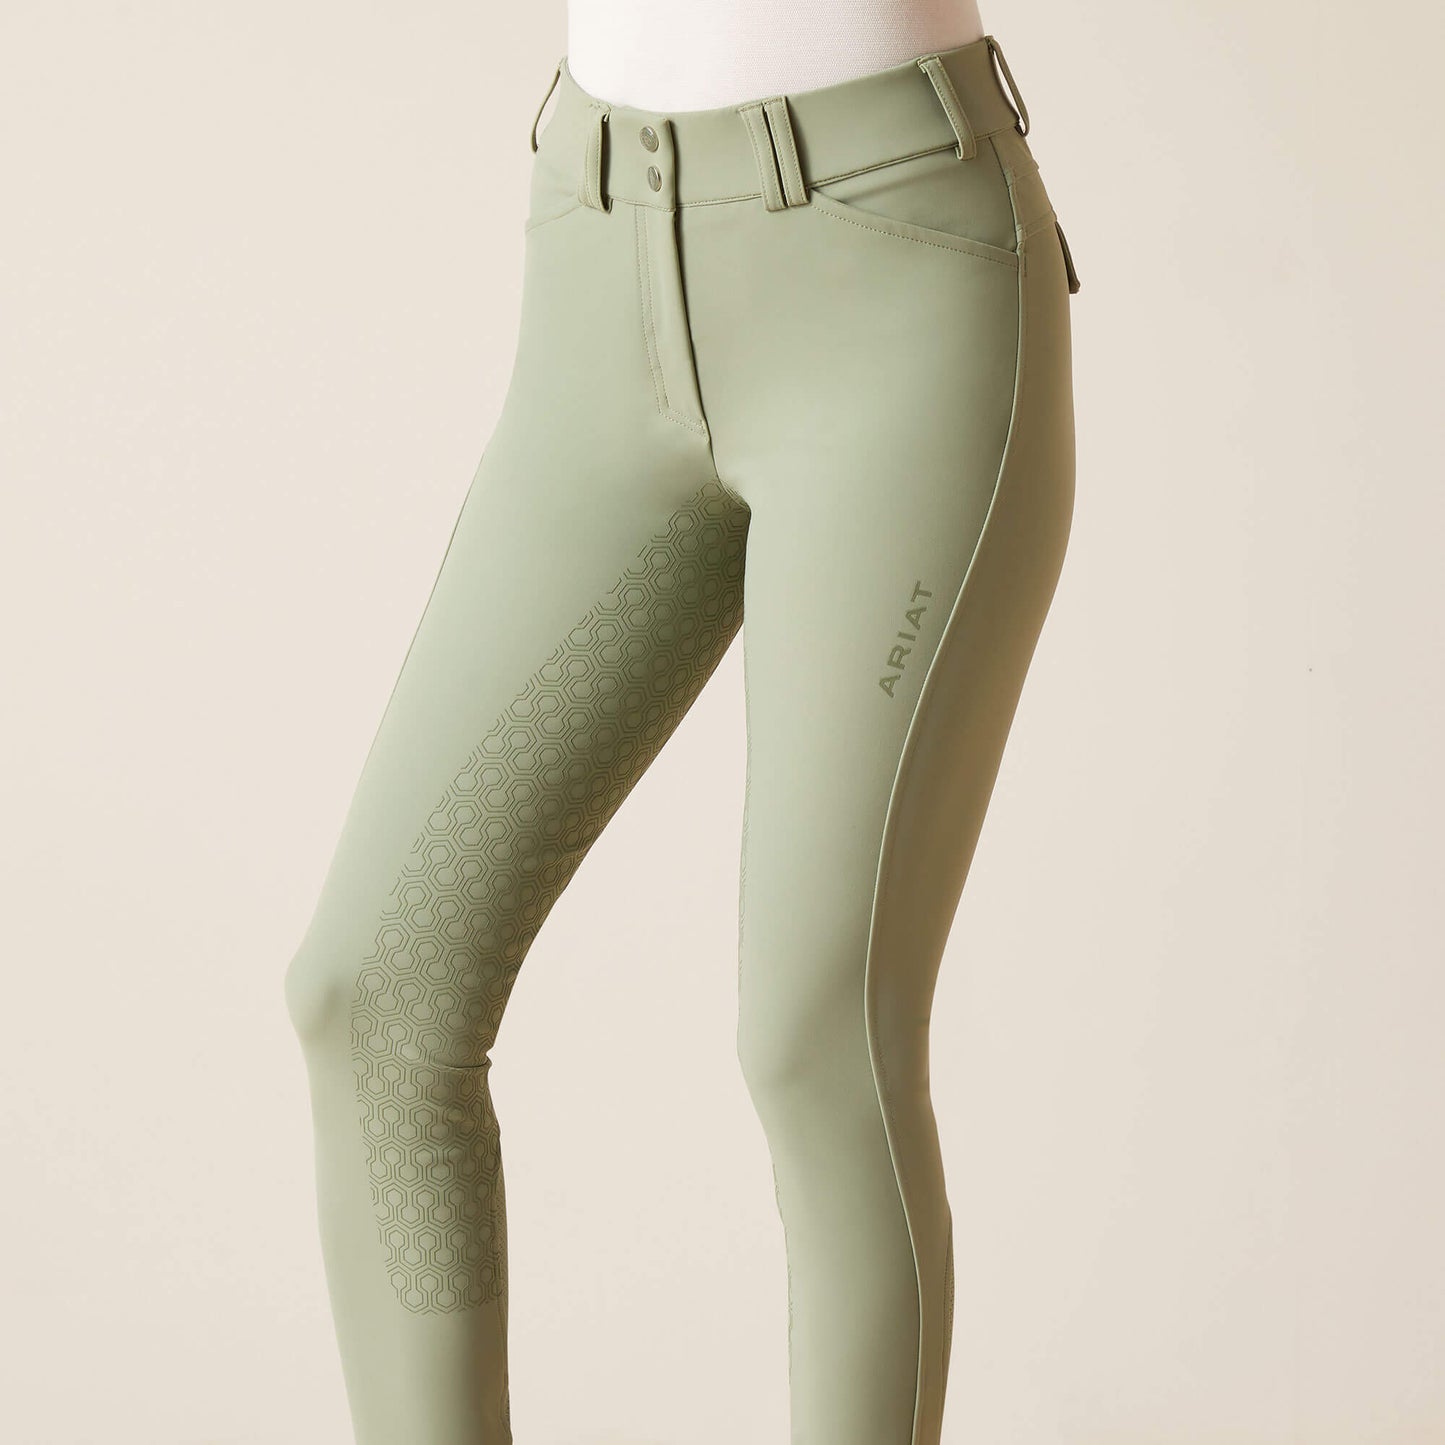 Ariat Lily Pad Tri Factor Breeches with Full Silicone Grip